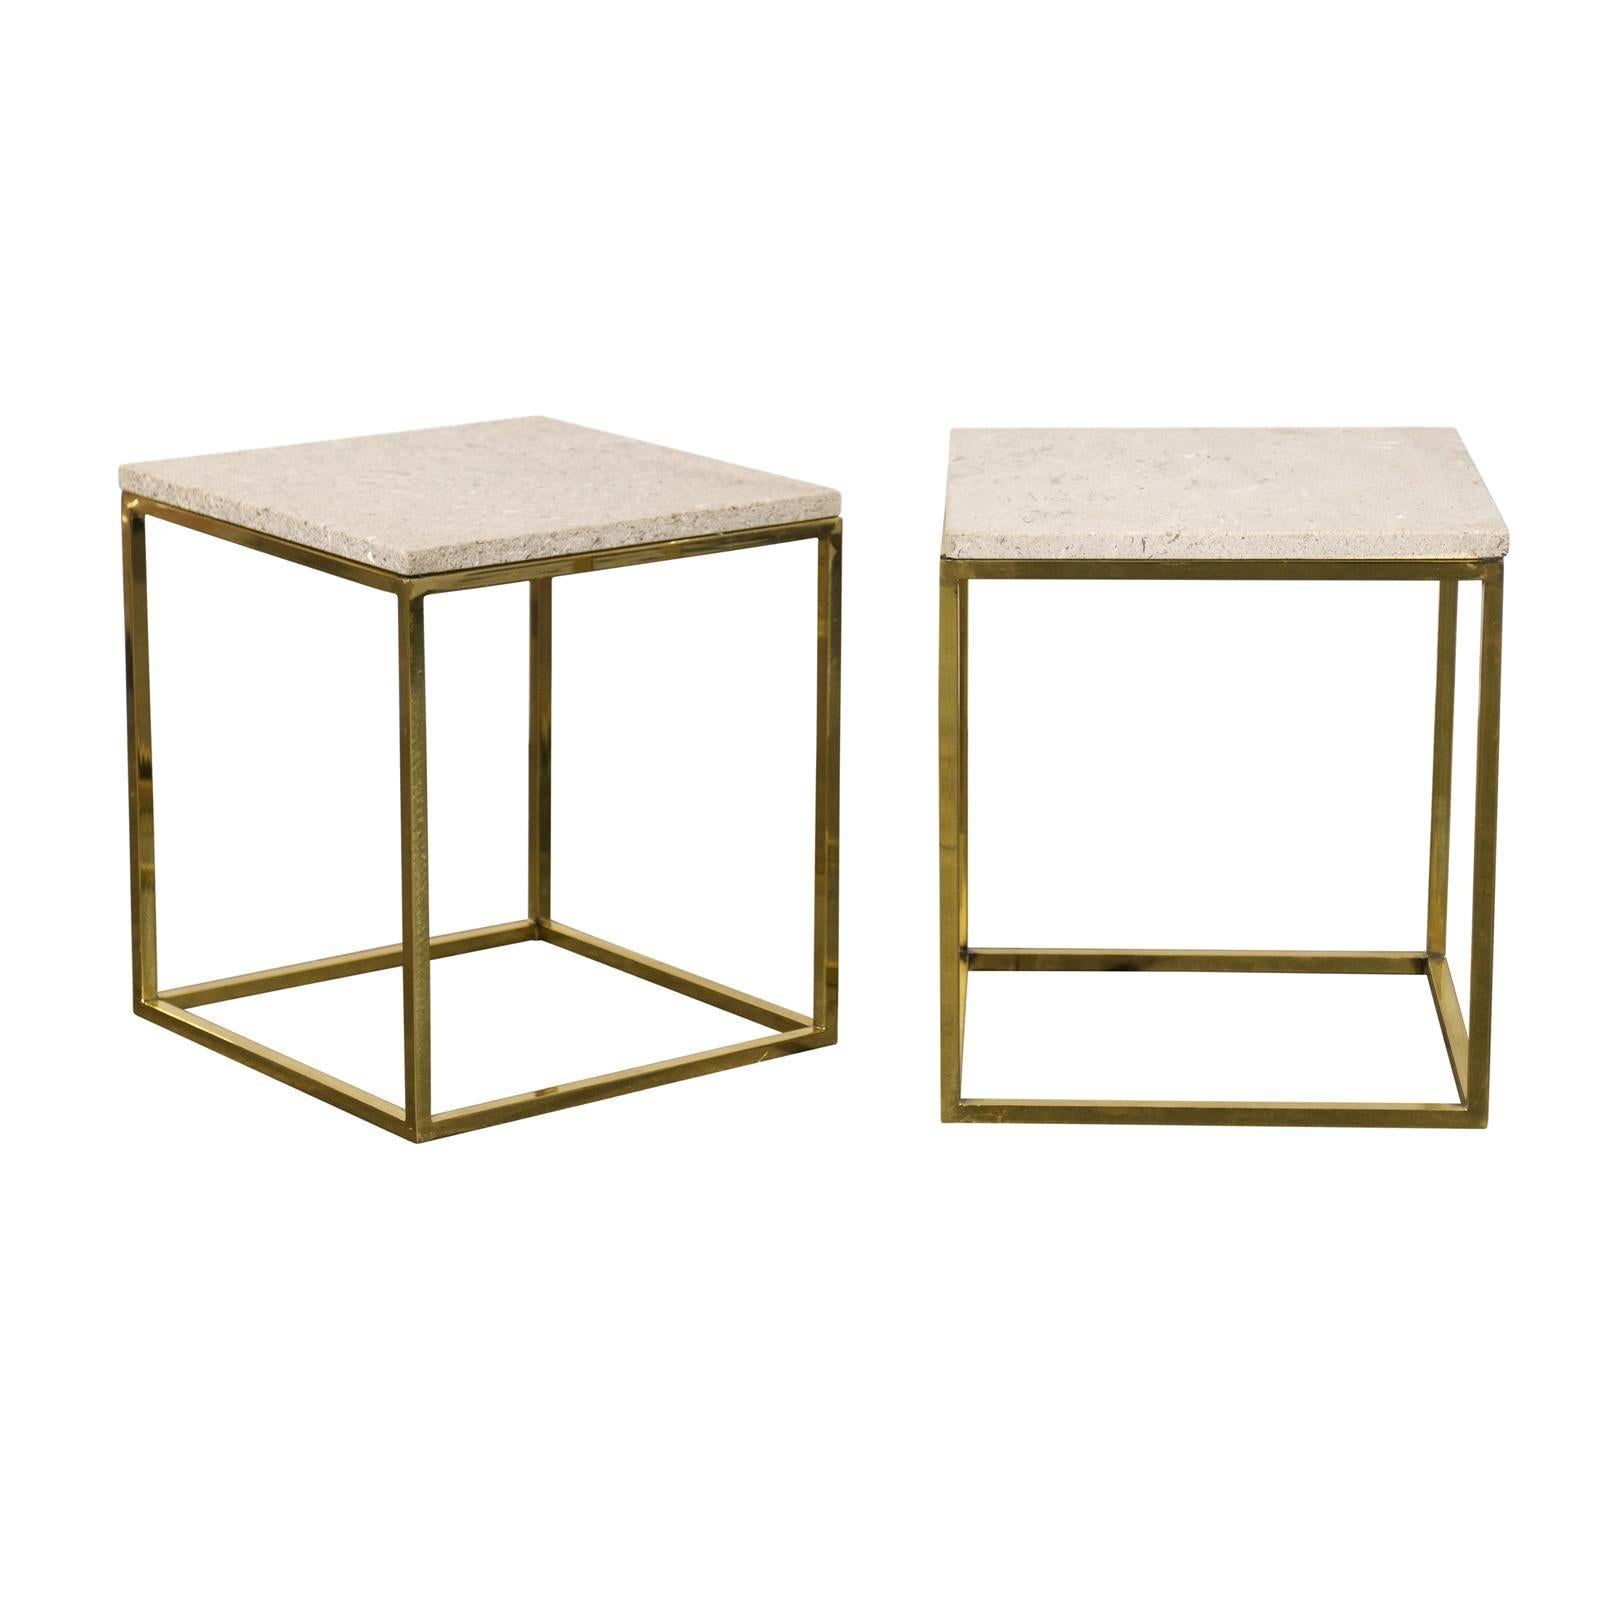 Pair of Travertine Top Brass Side Tables in the Style of Paul McCobb, 1950s